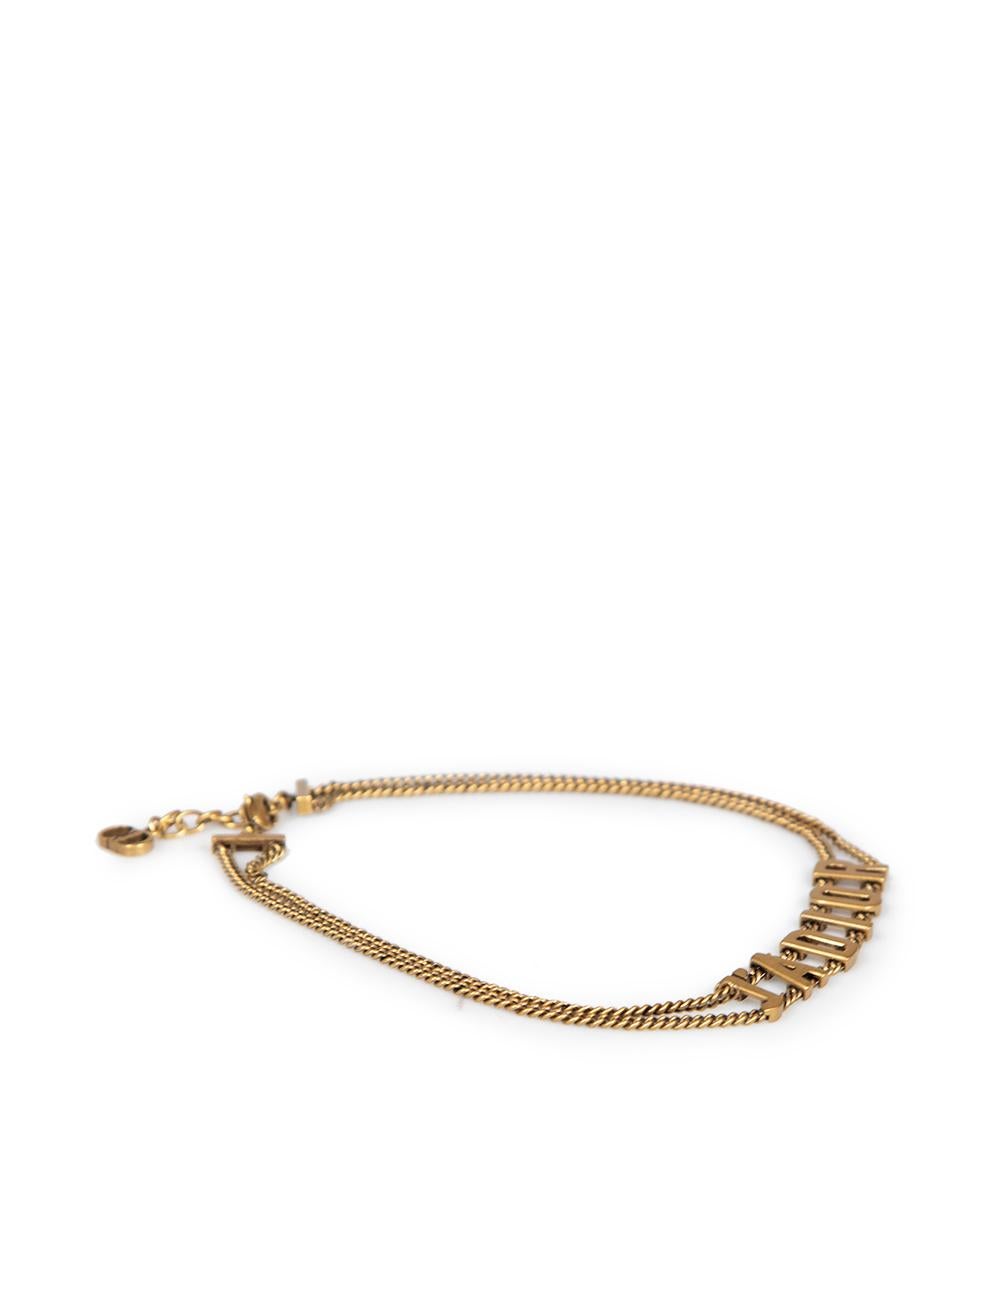 CONDITION is Very good. Minimal wear to necklace is evident. Minimal wear to the metallic surface with some very light scratching and tarnishing seen throughout on this used Dior designer resale item.
 
Details
Old gold
Metal
J‚ÄôAdior chain